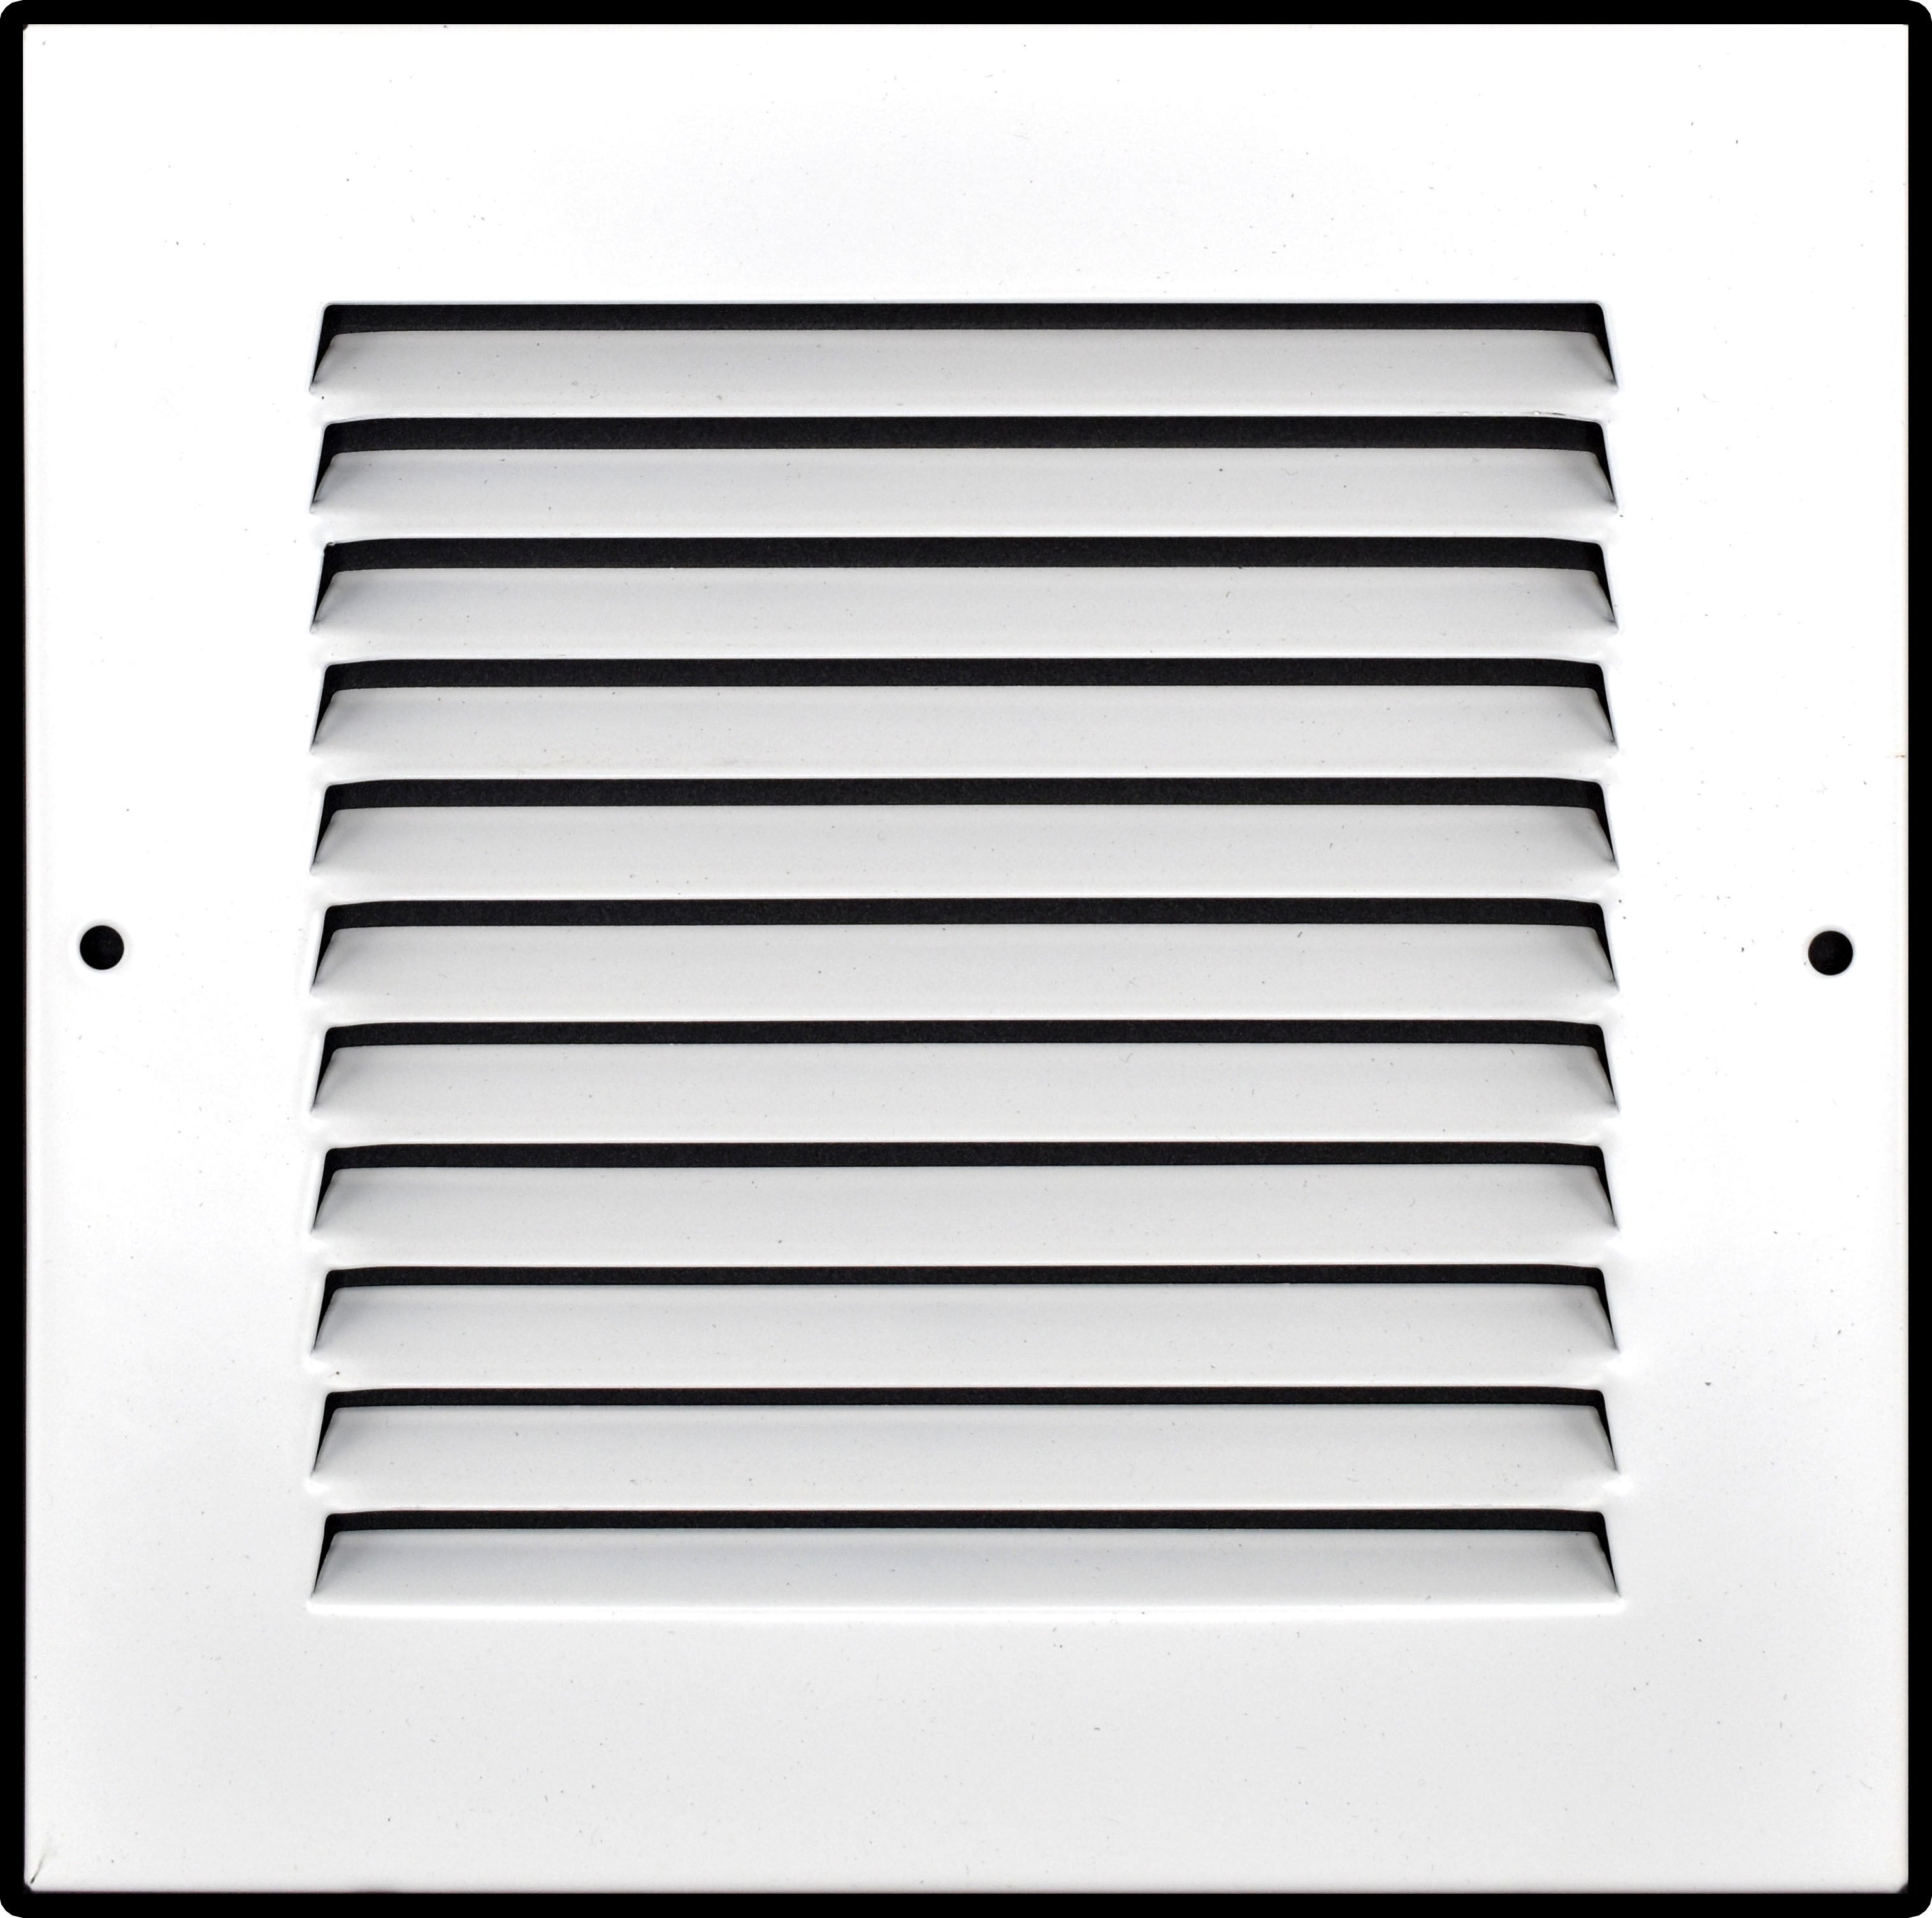 airgrilles 6" x 6" duct opening hd steel return air grille for sidewall and ceiling 7hnd-flt-rg-wh-6x6 038775640572 1